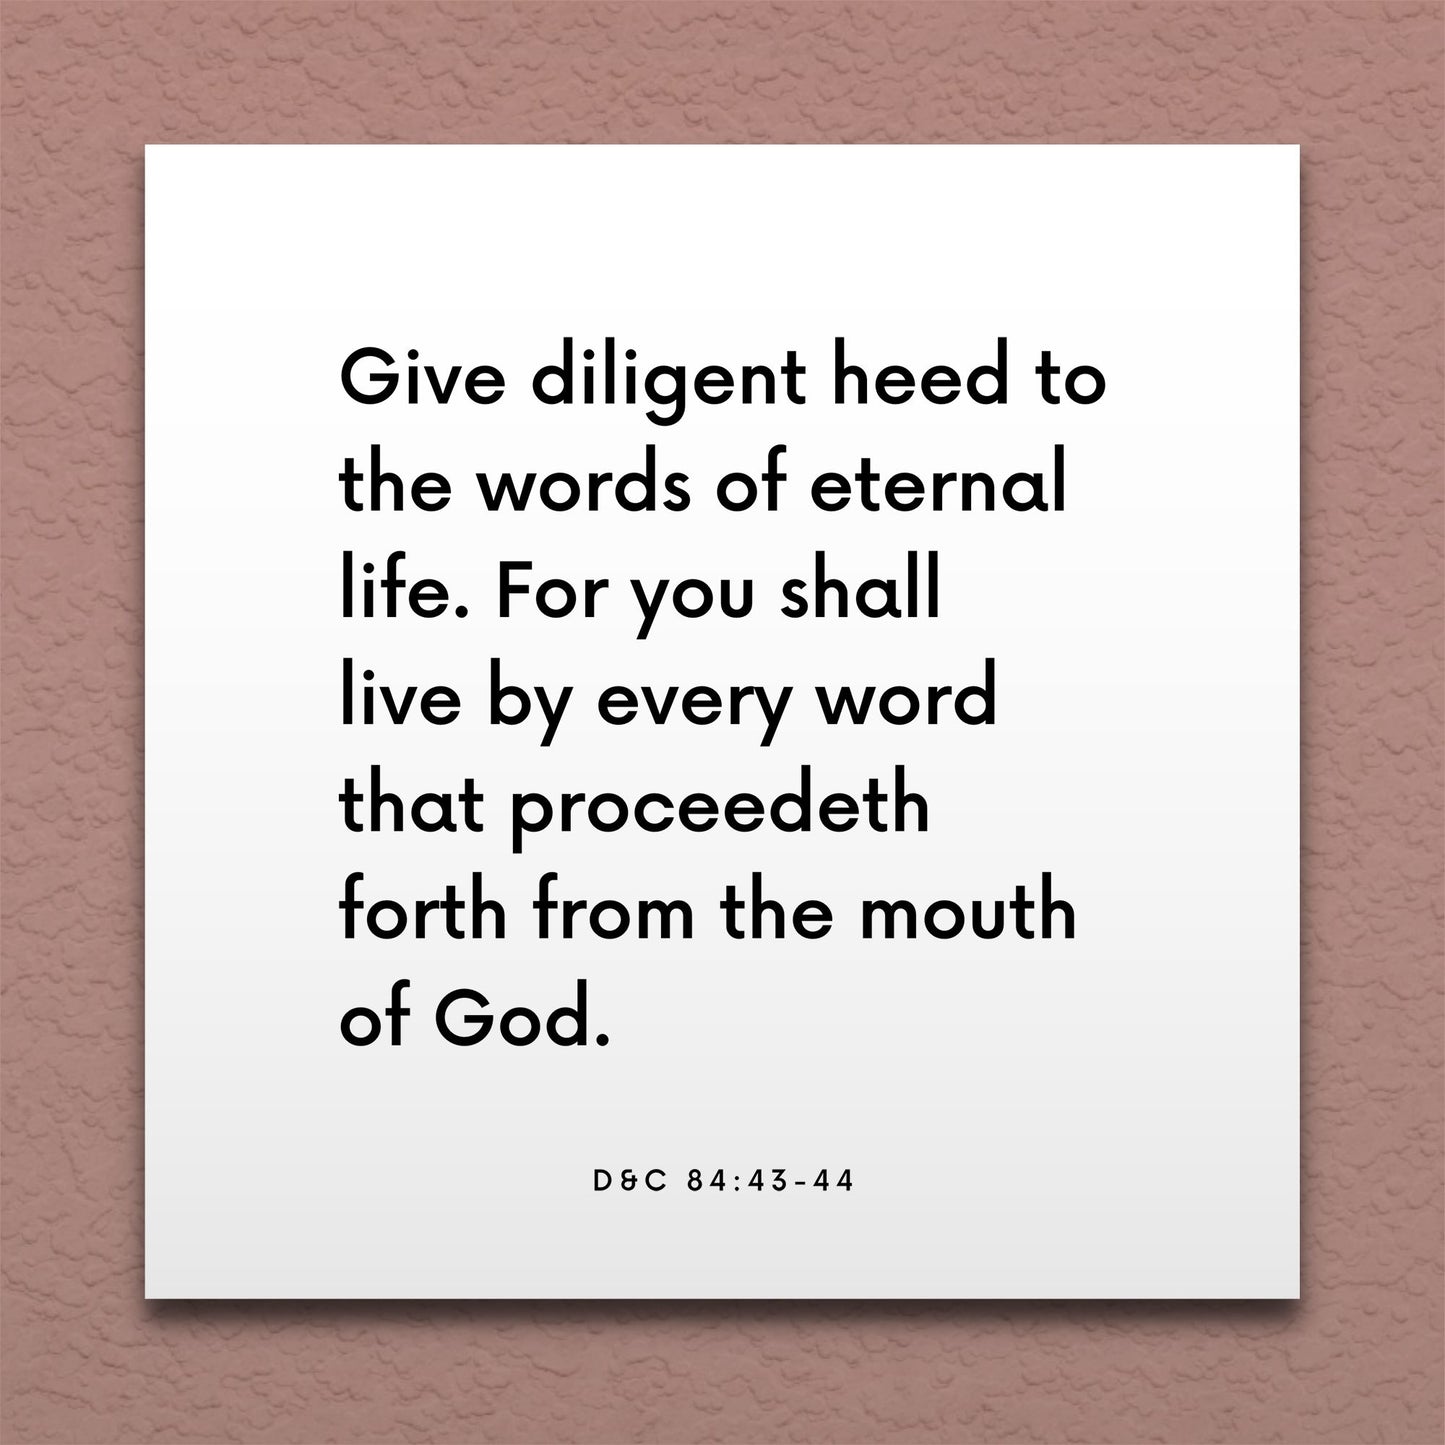 Wall-mounted scripture tile for D&C 84:43-44 - "Give diligent heed to the words of eternal life"